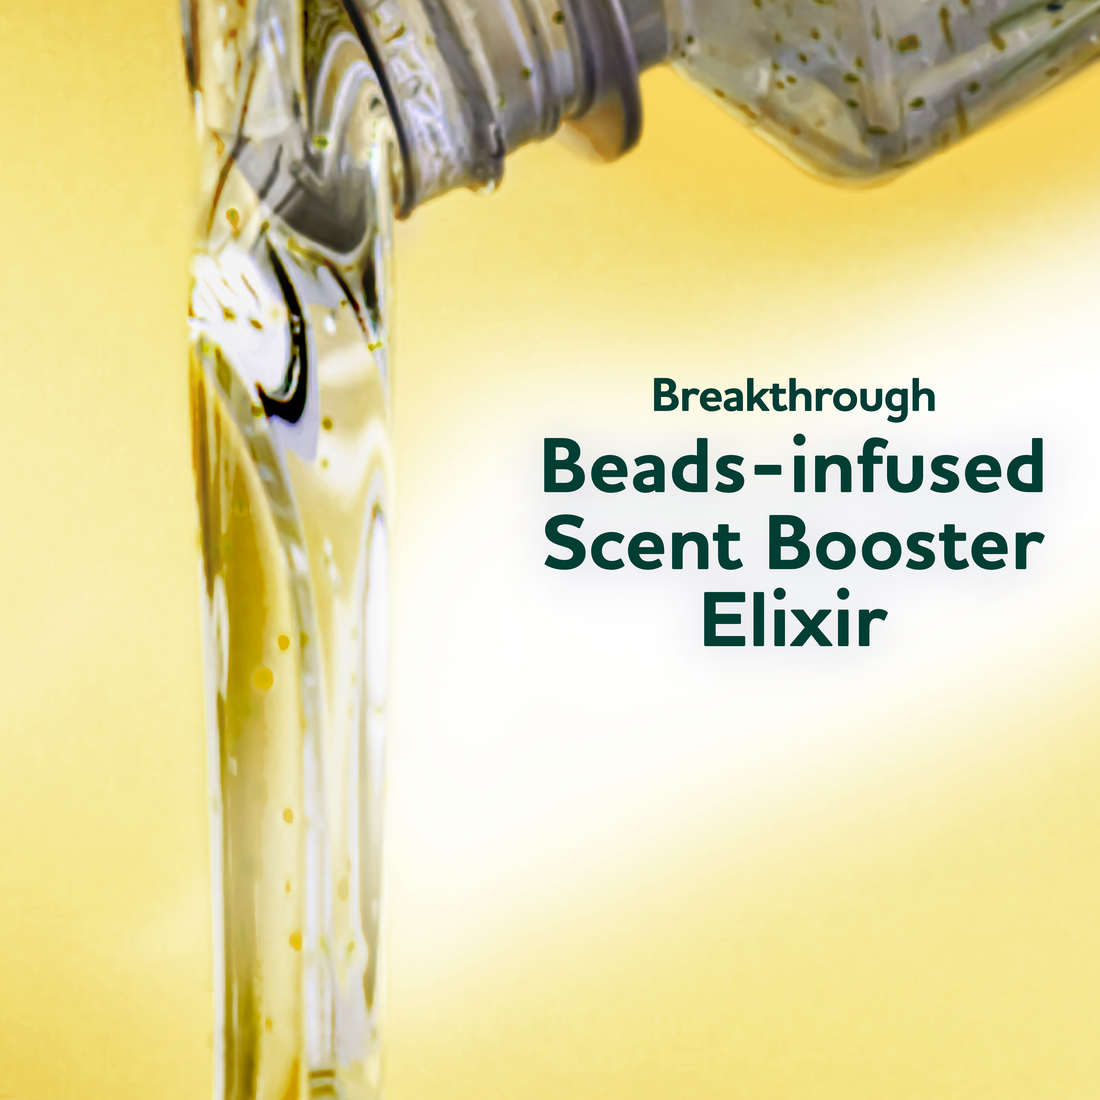 Breakthrough Beads-Infused Scent Booster Elixir